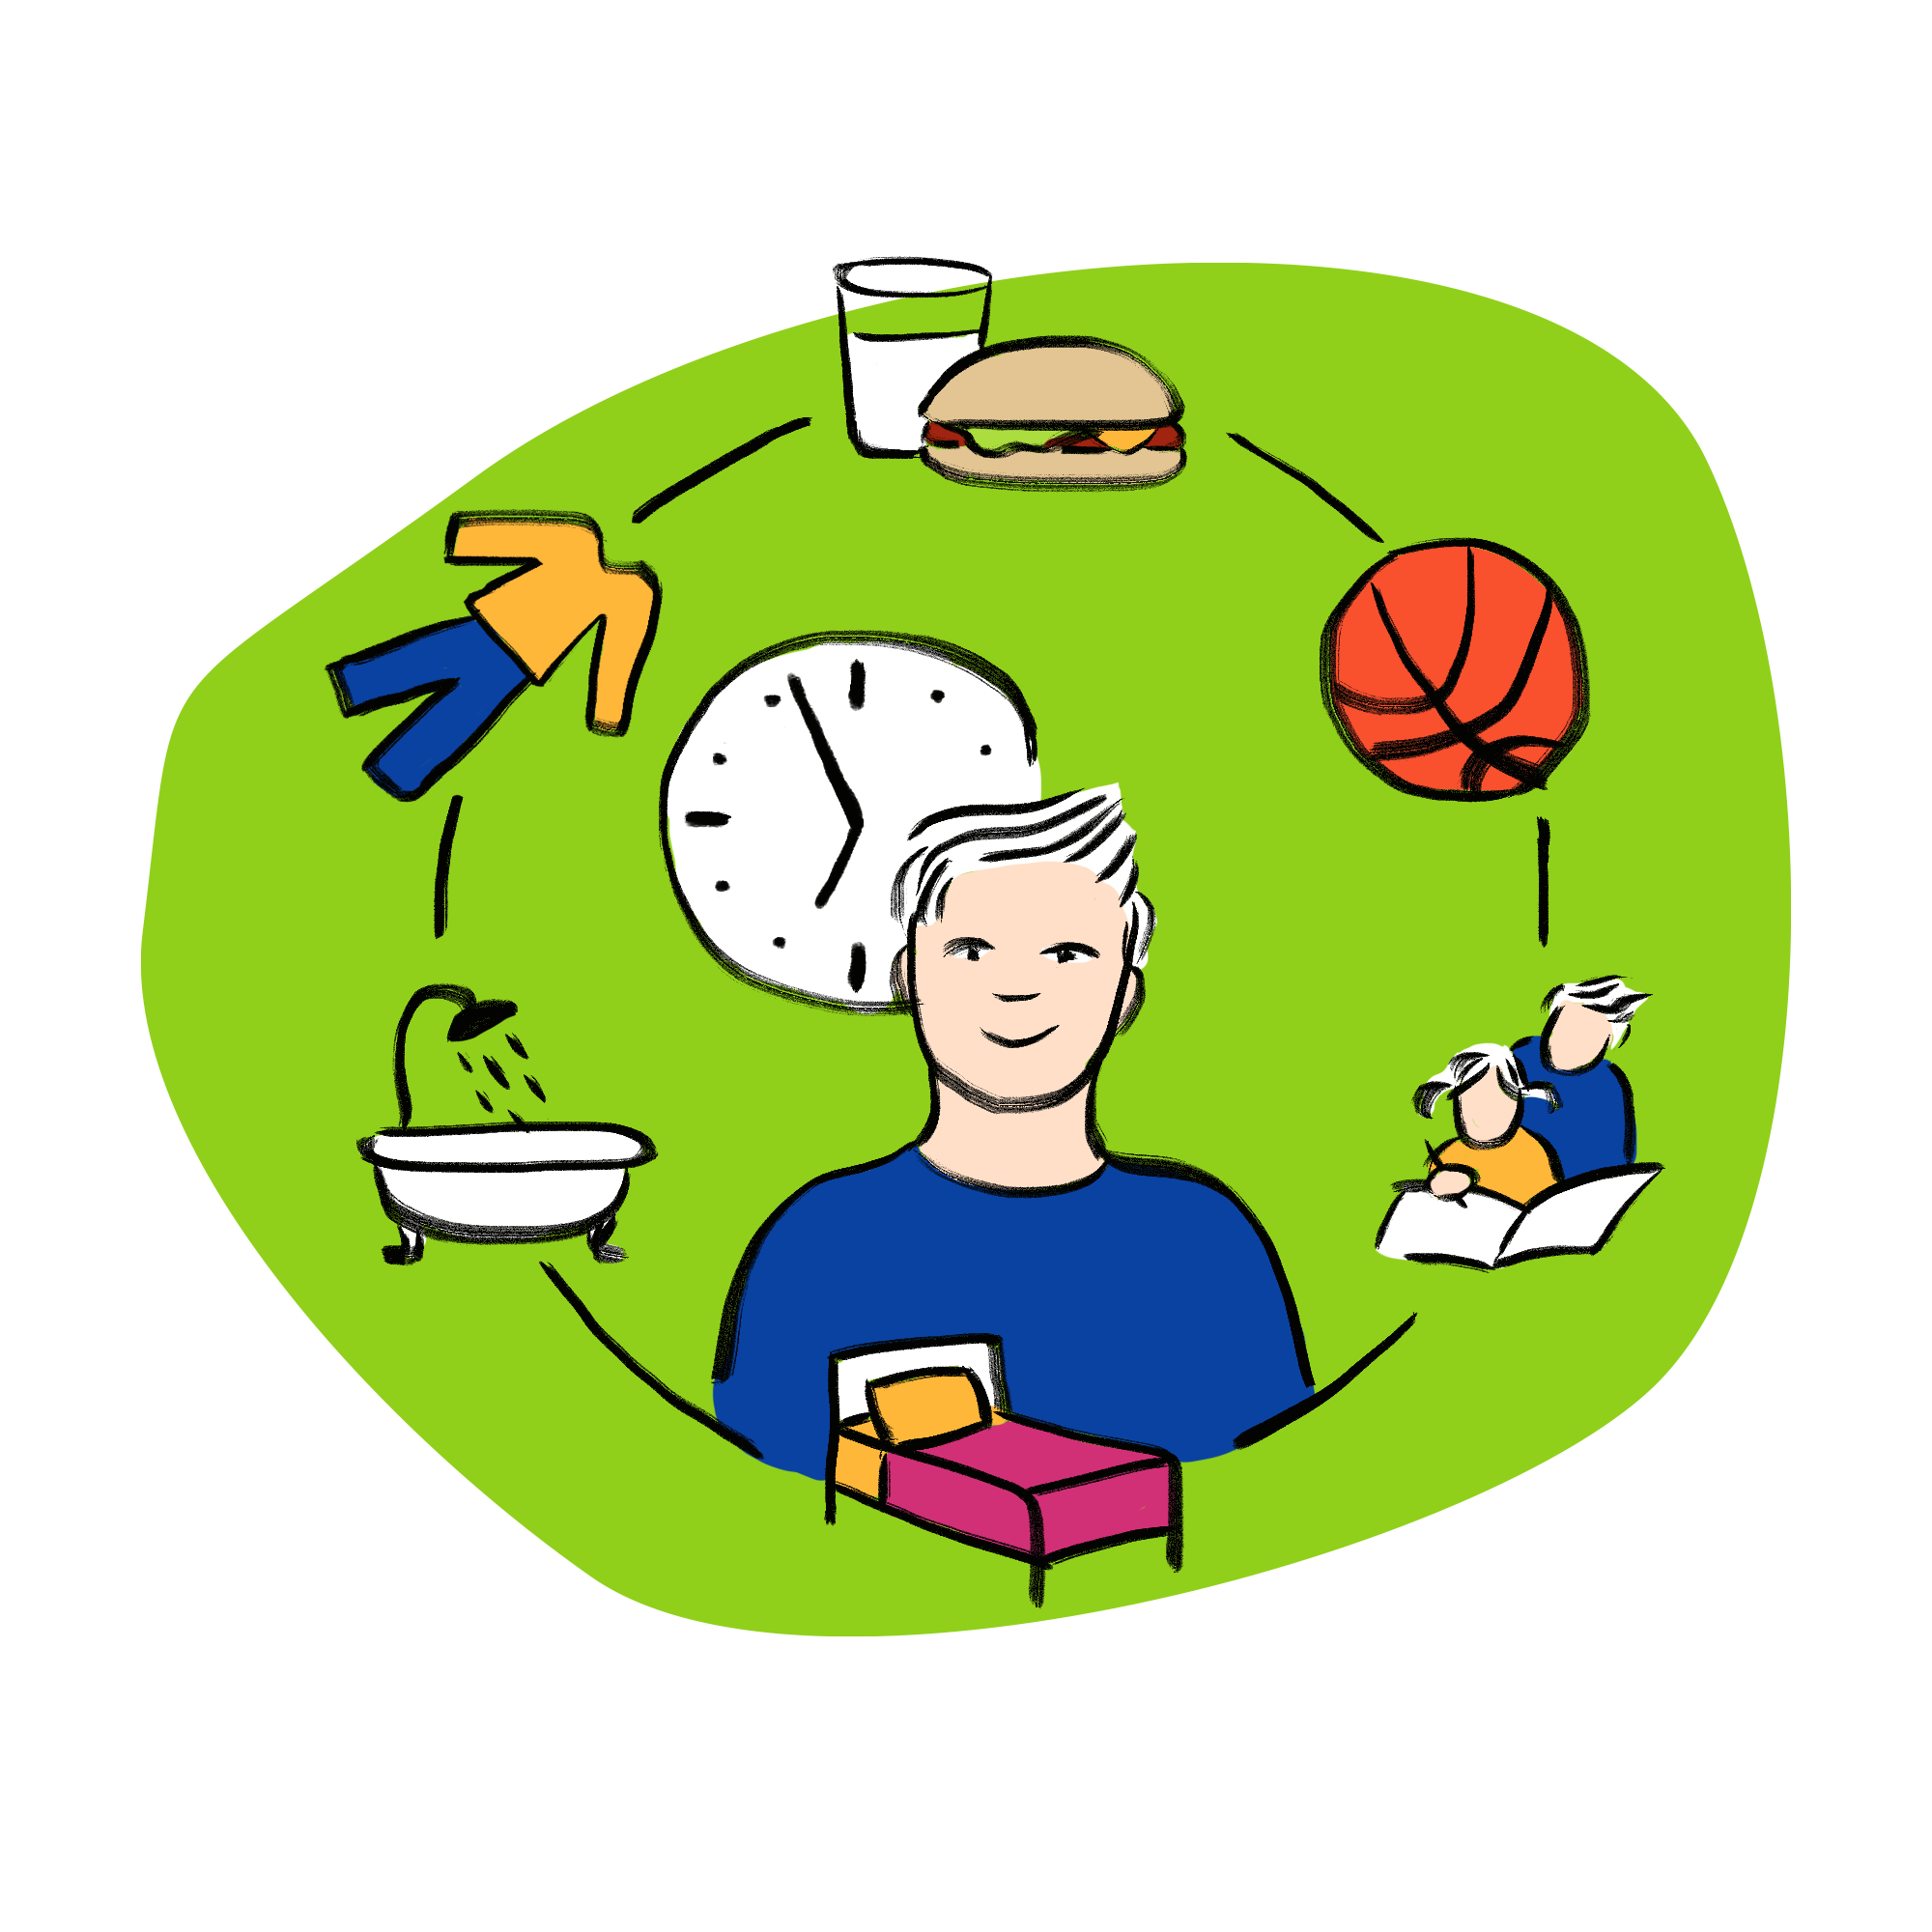 Man at the center of an activity wheel